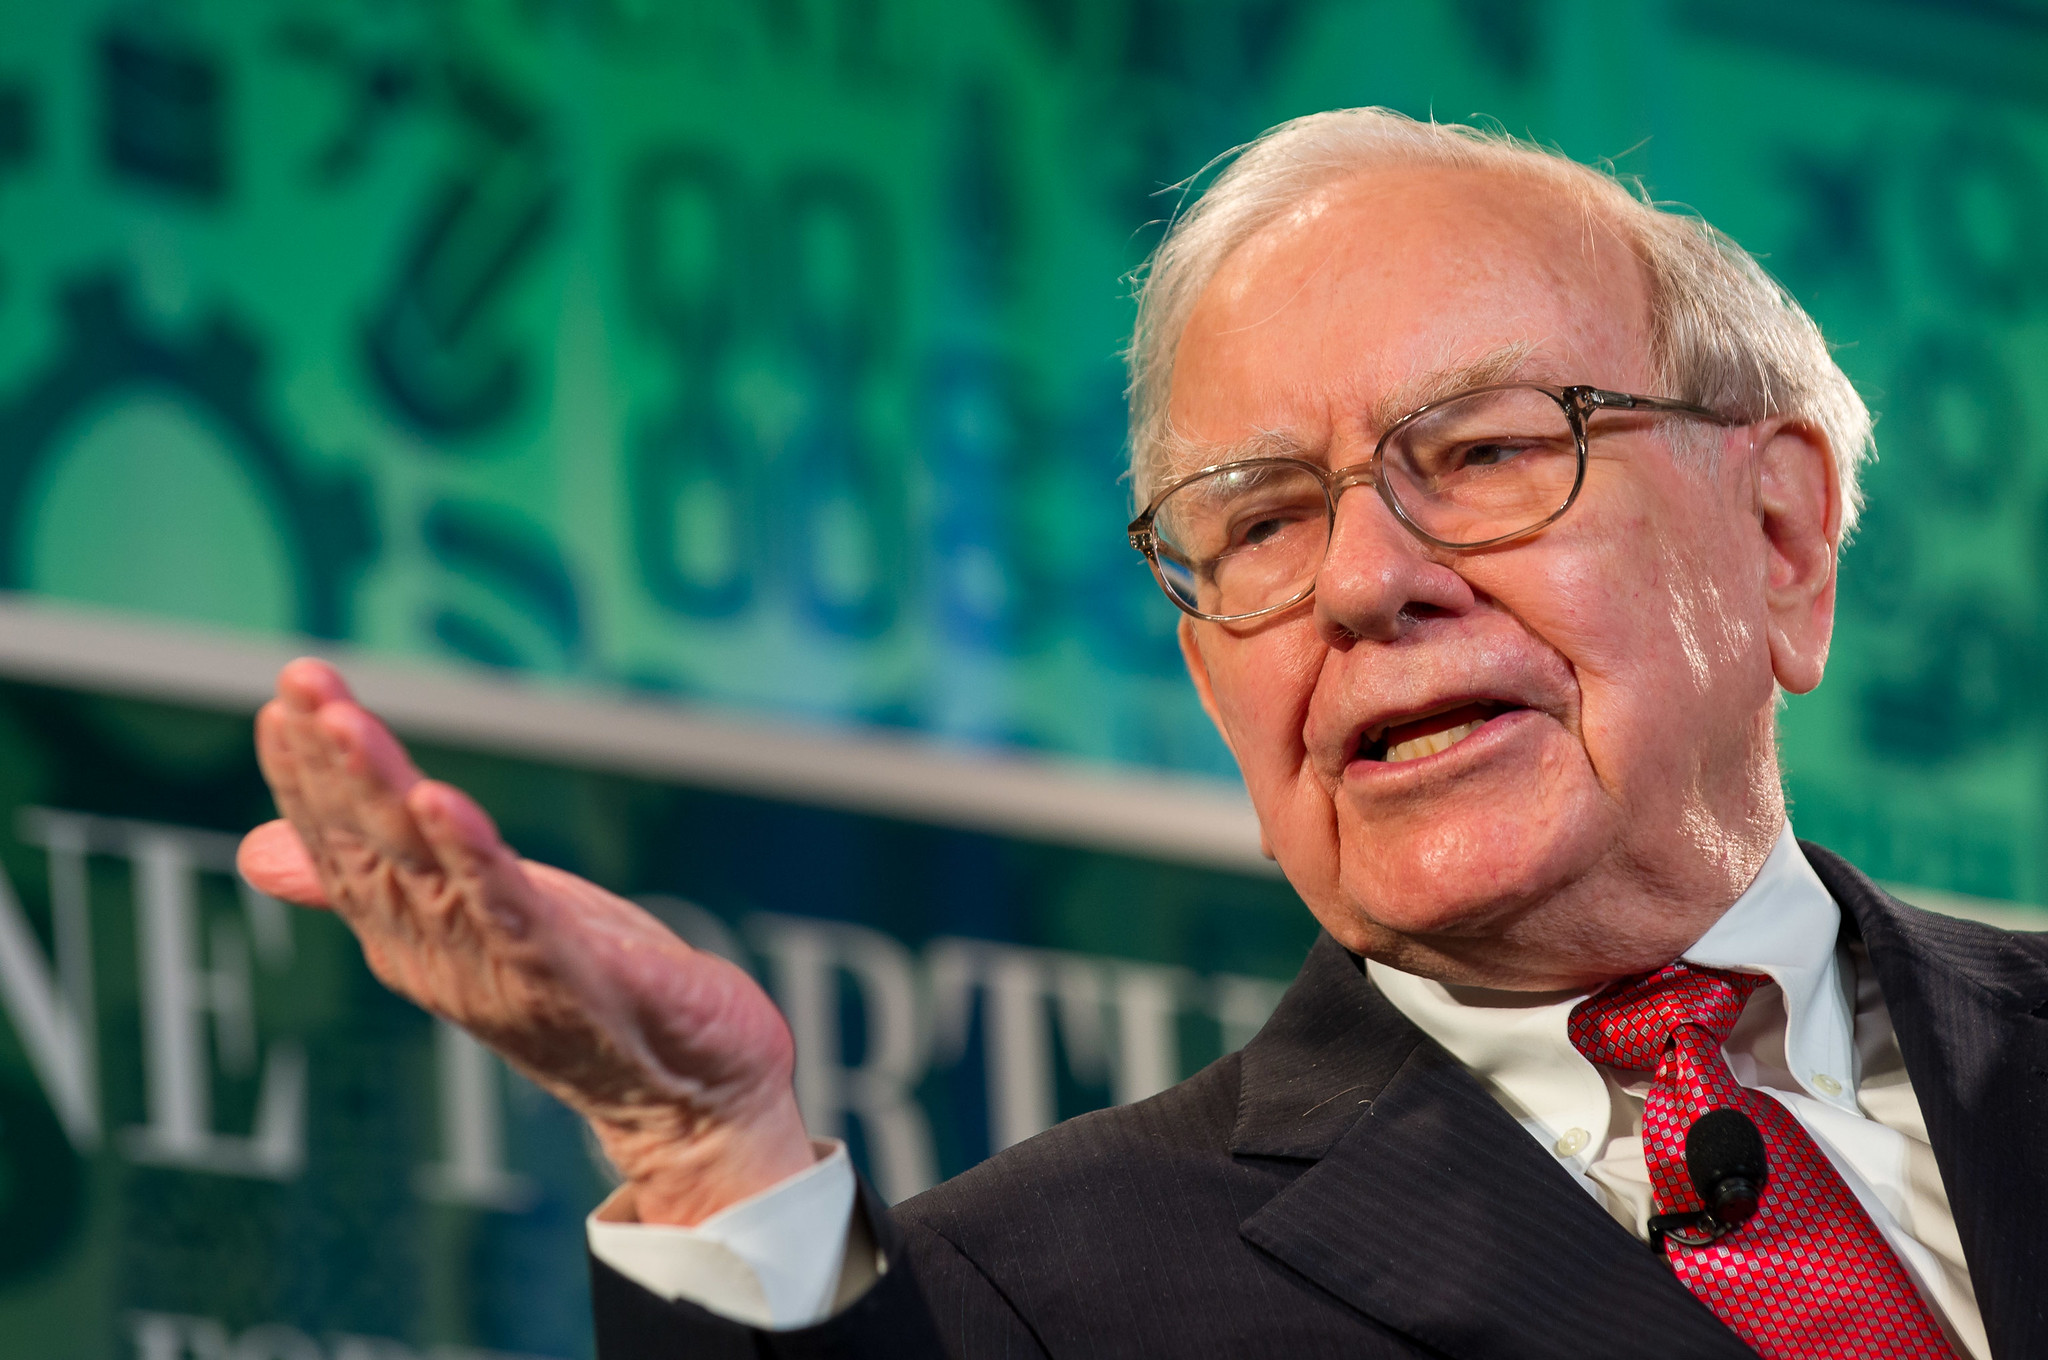 Watch: Buffett updates attendees on profits and discusses artificial intelligence in annual Berkshire Hathaway Meeting